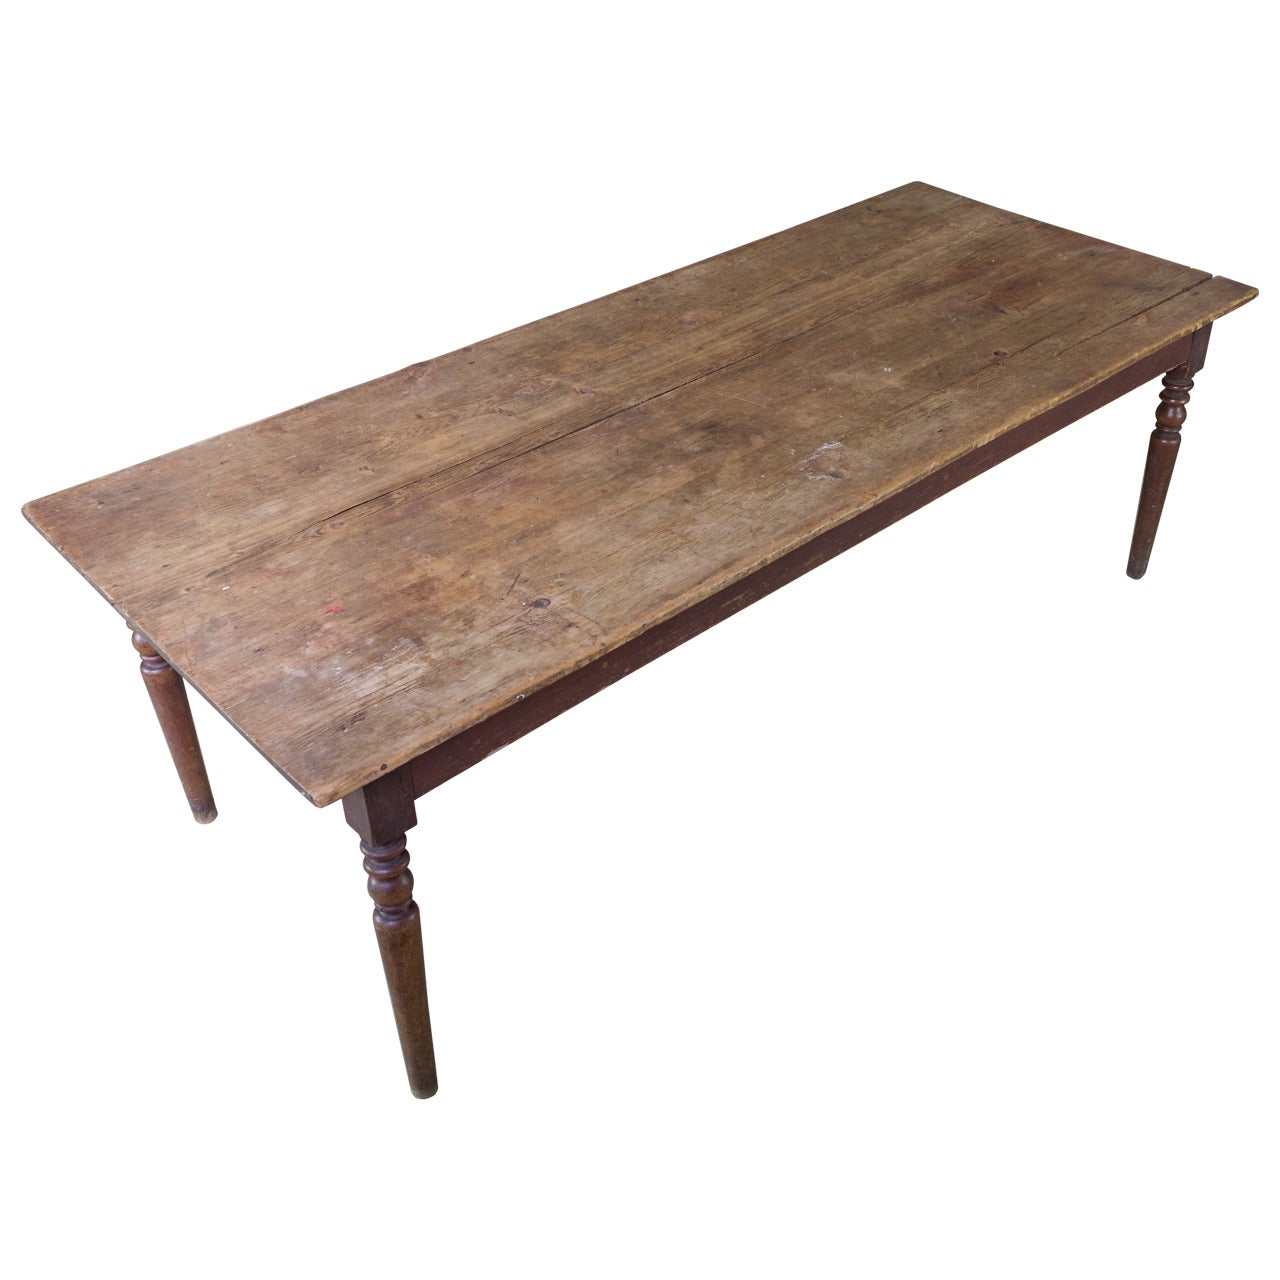 French Oak Farm Table with Turned Legs